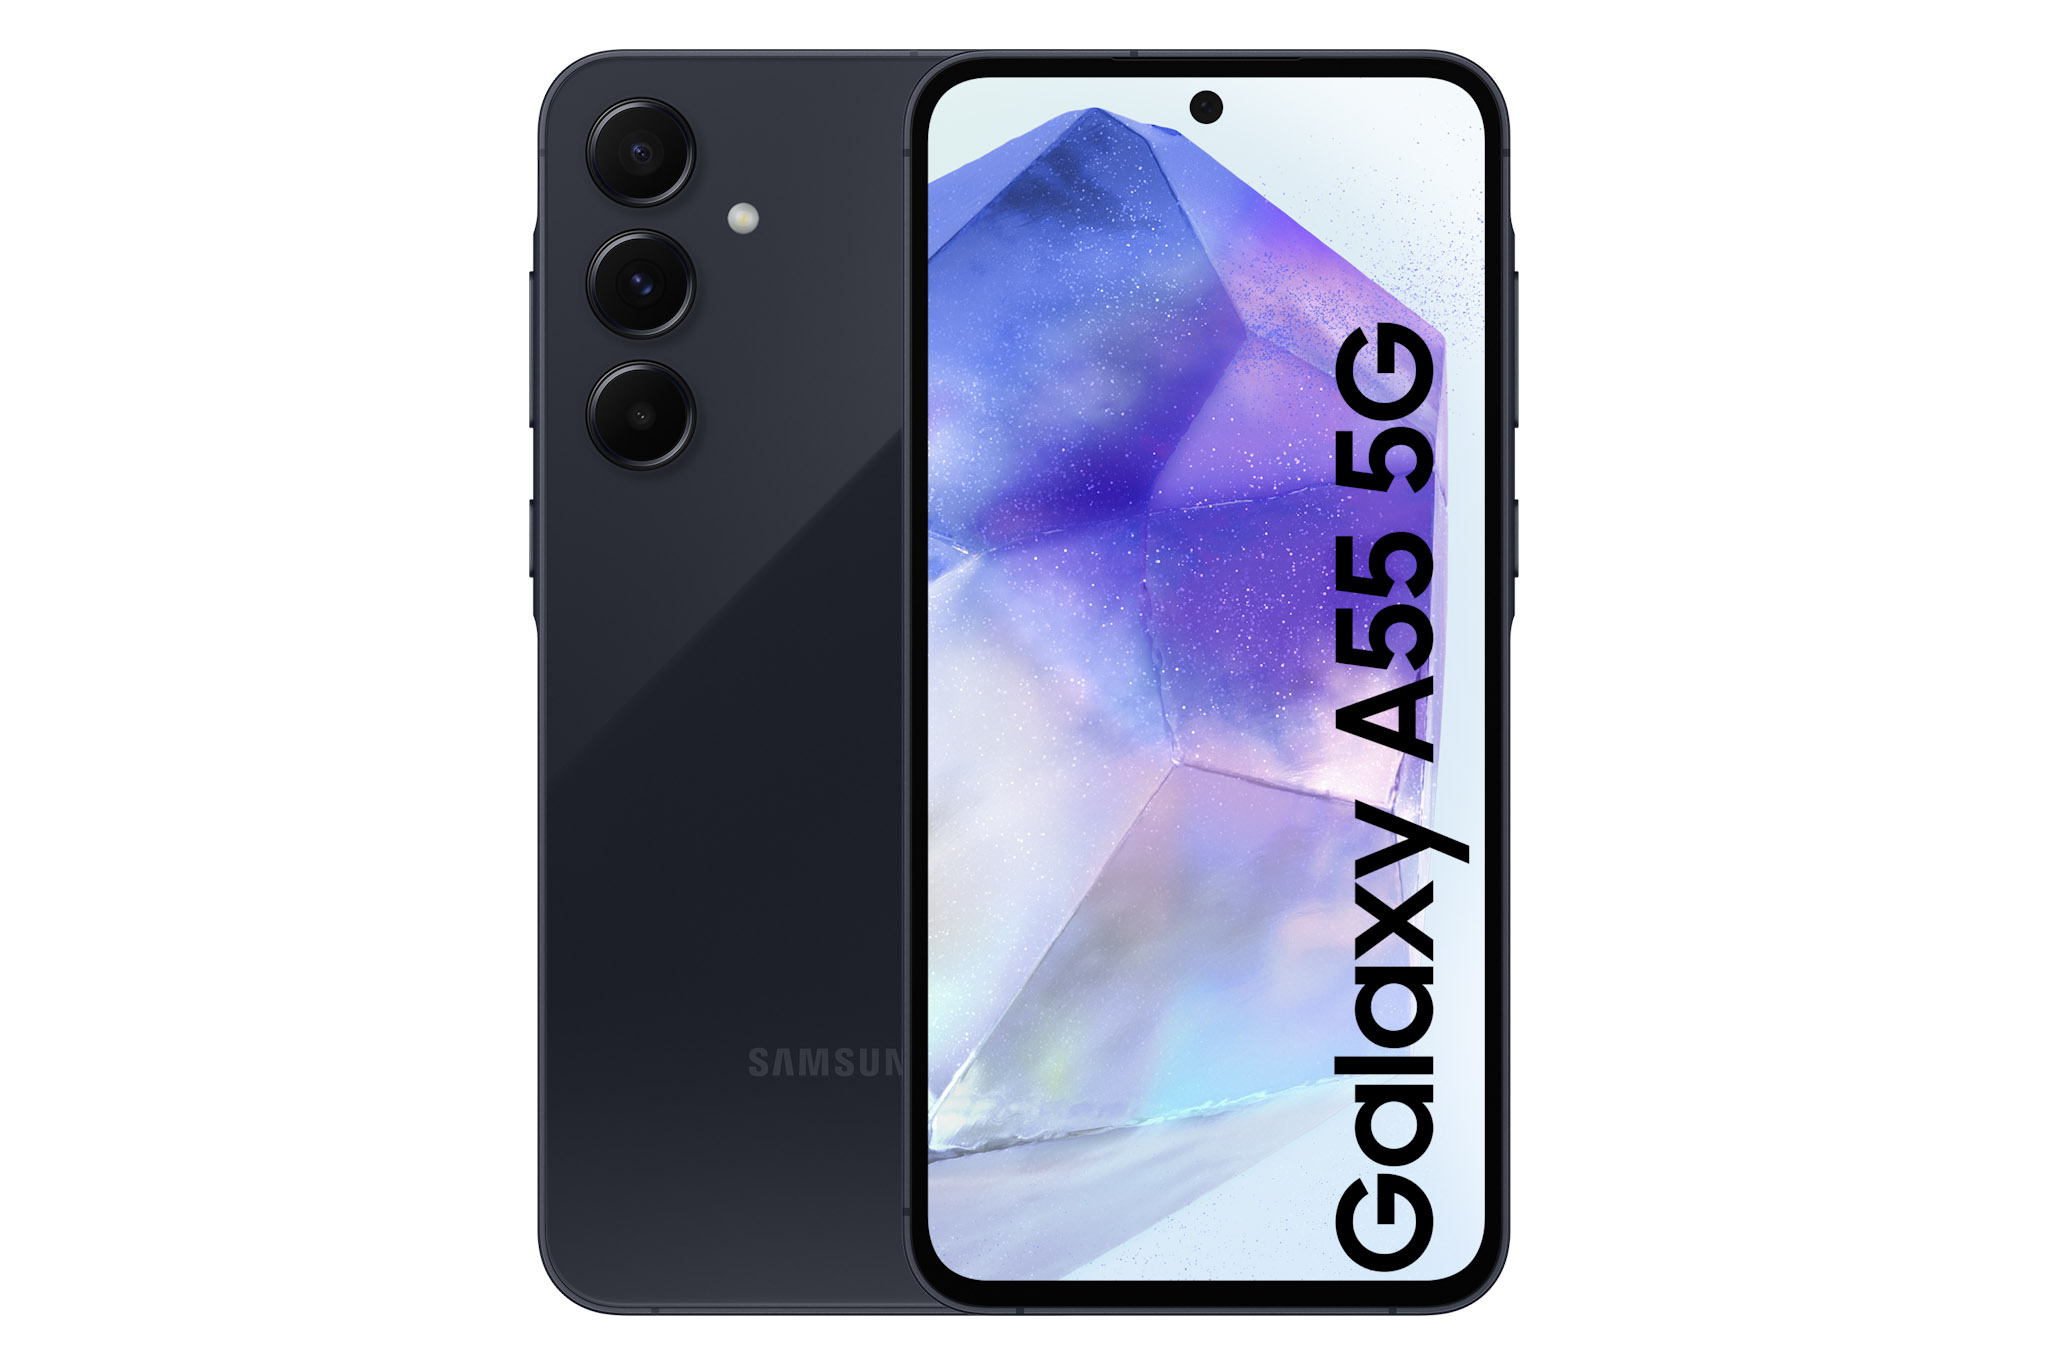 illustrative image of the Samsung Galaxy A55 smartphone from the rear and the front